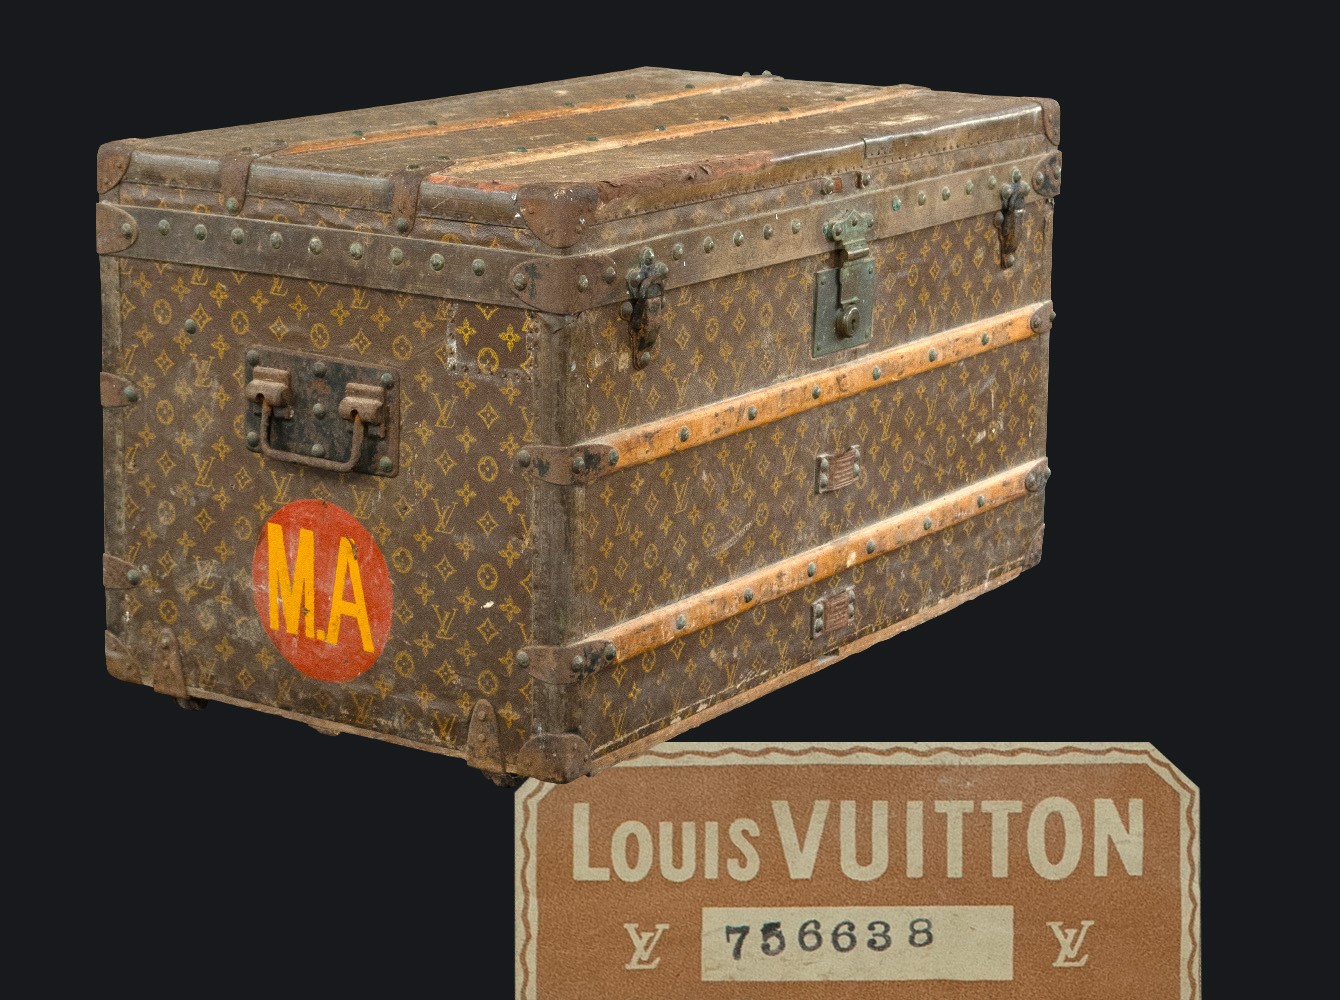 Sold at Auction: Louis Vuitton Trunk Traditional LV Design